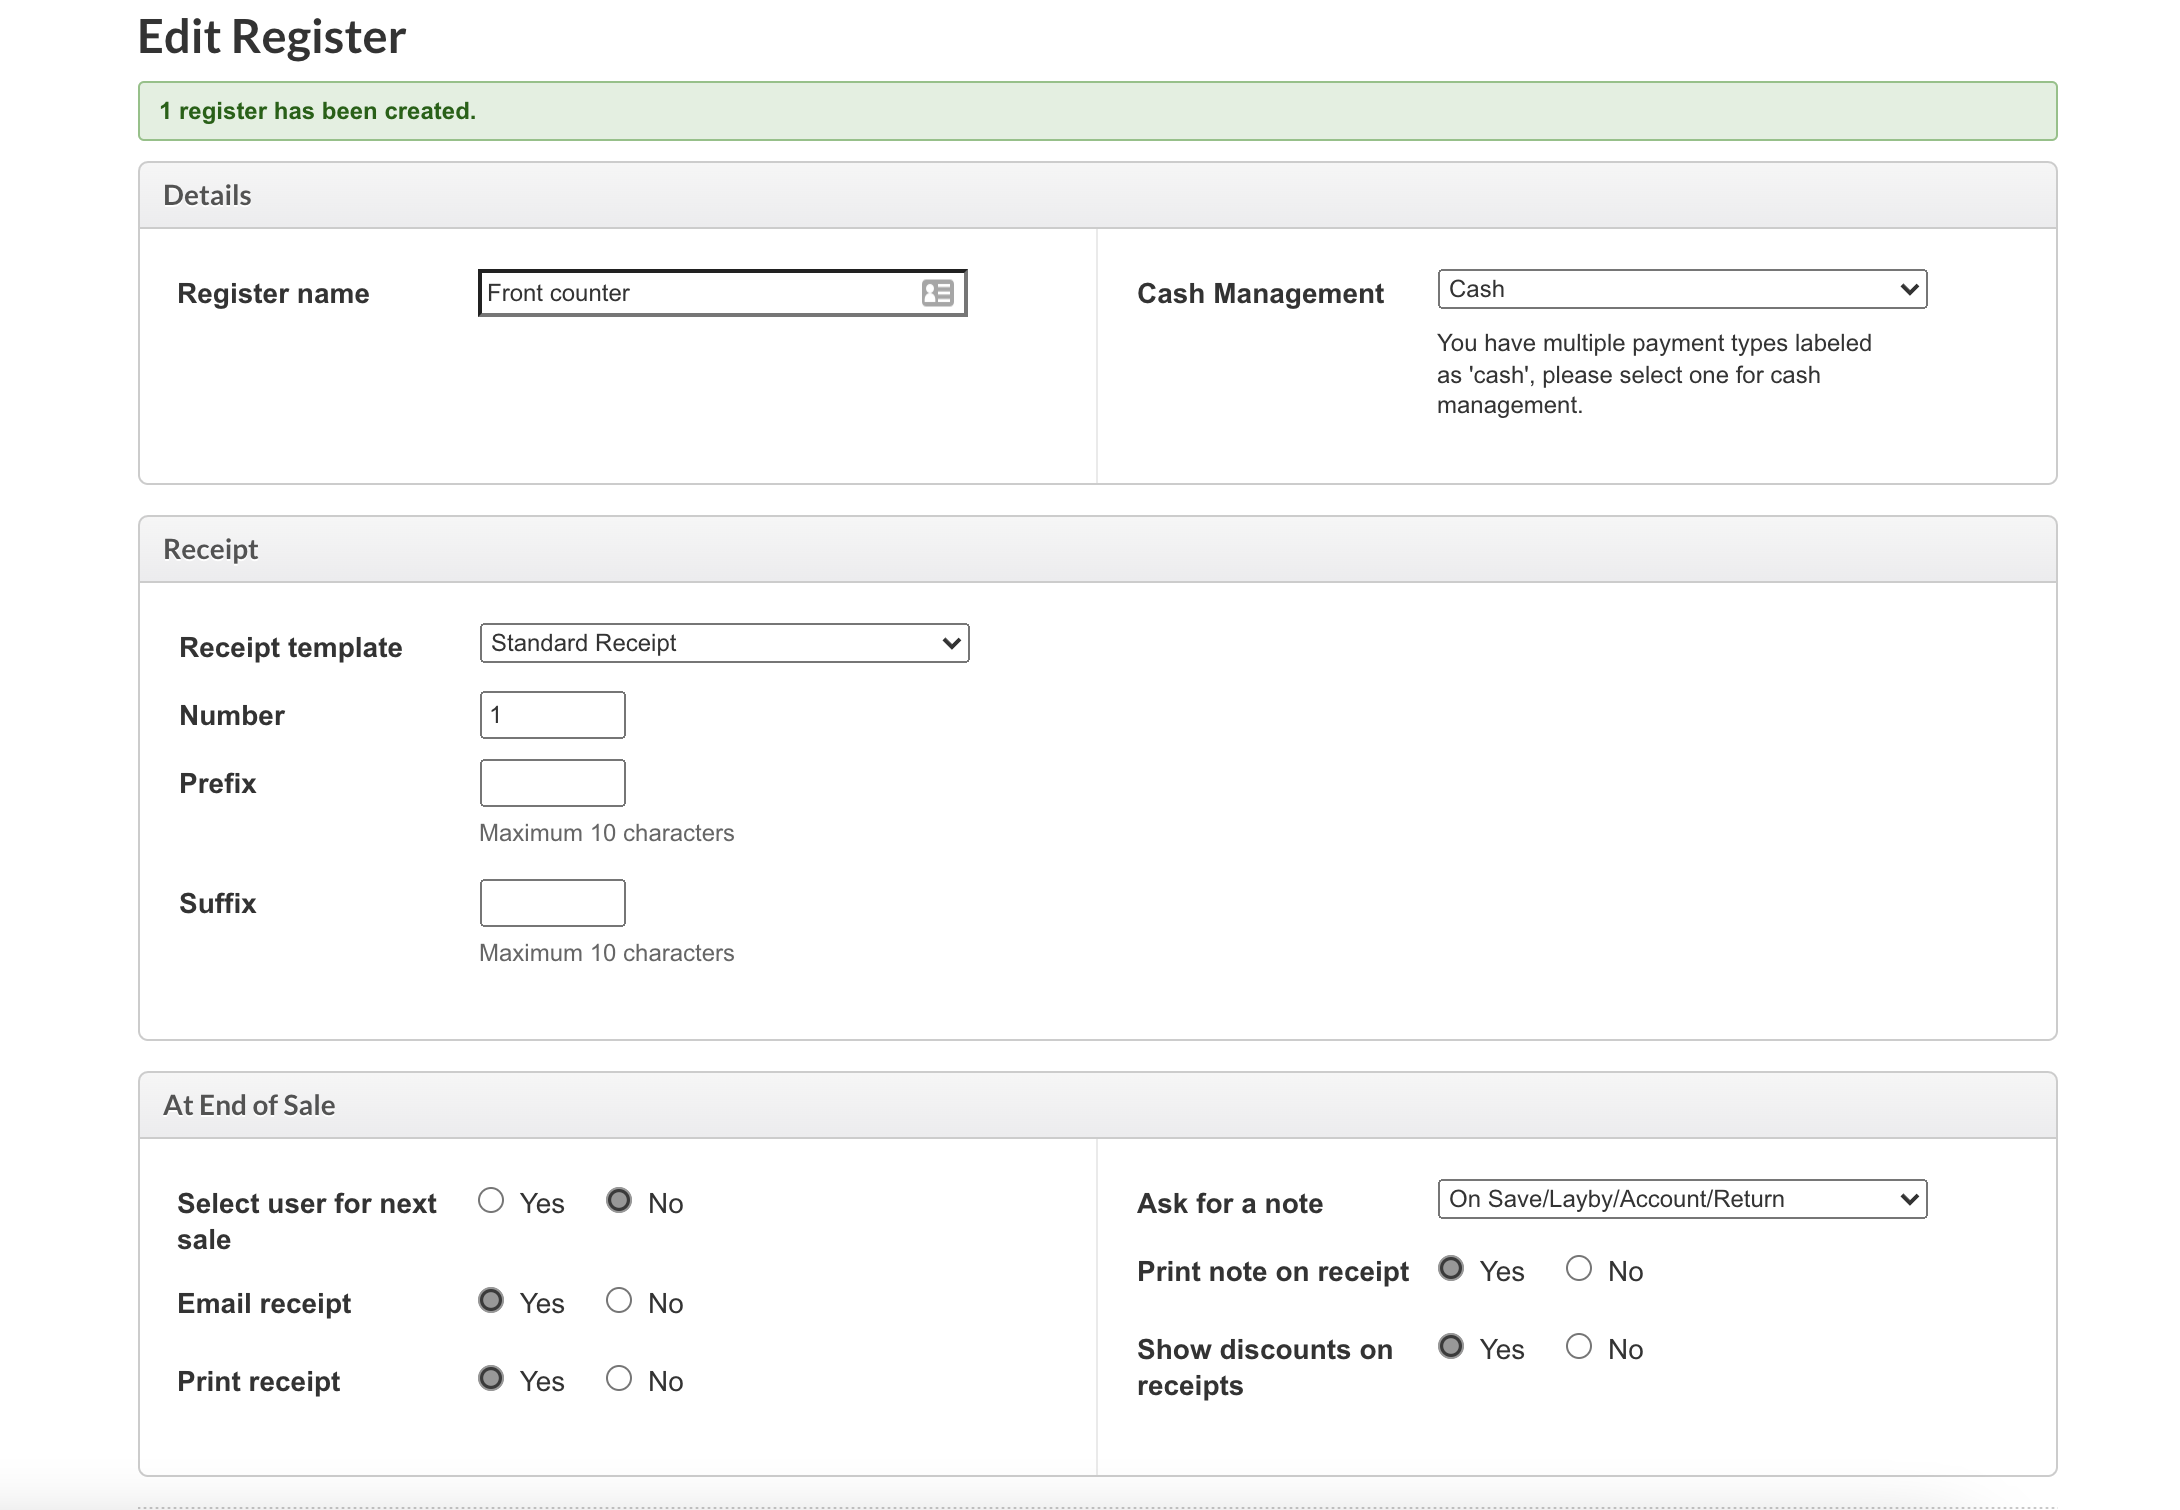 The register setup page showing the Edit Register input fields to fill.